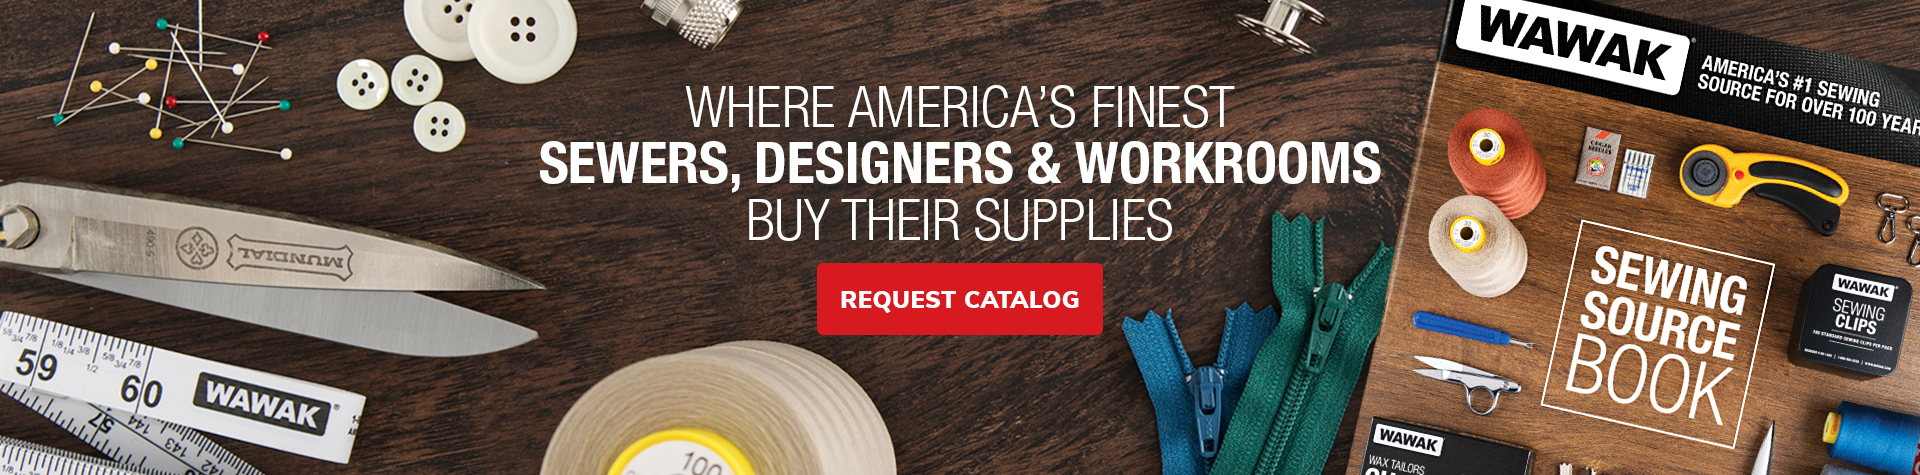 Where America's Fineset Sewers, Designers & Workrooms Buy Their Supplies. Request A WAWAK Catalog. | WAWAK Sewing Supplies